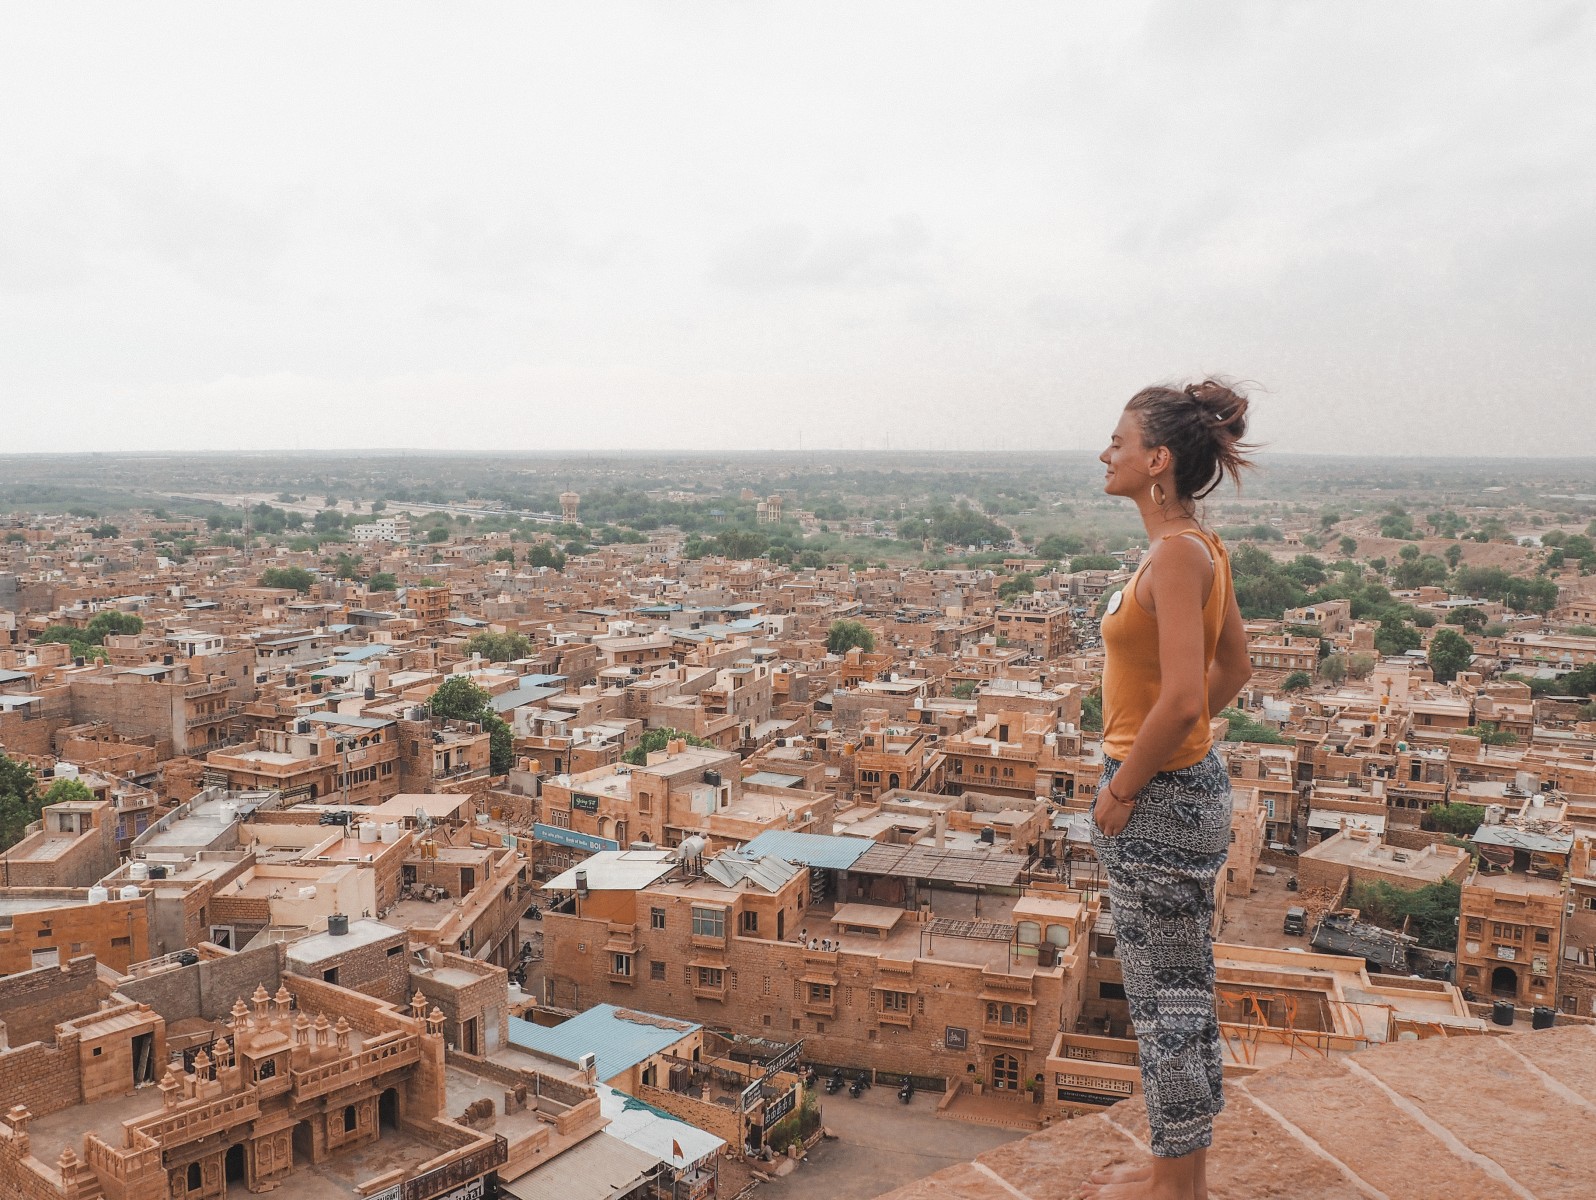 View over the city from Jaisalmer fort 